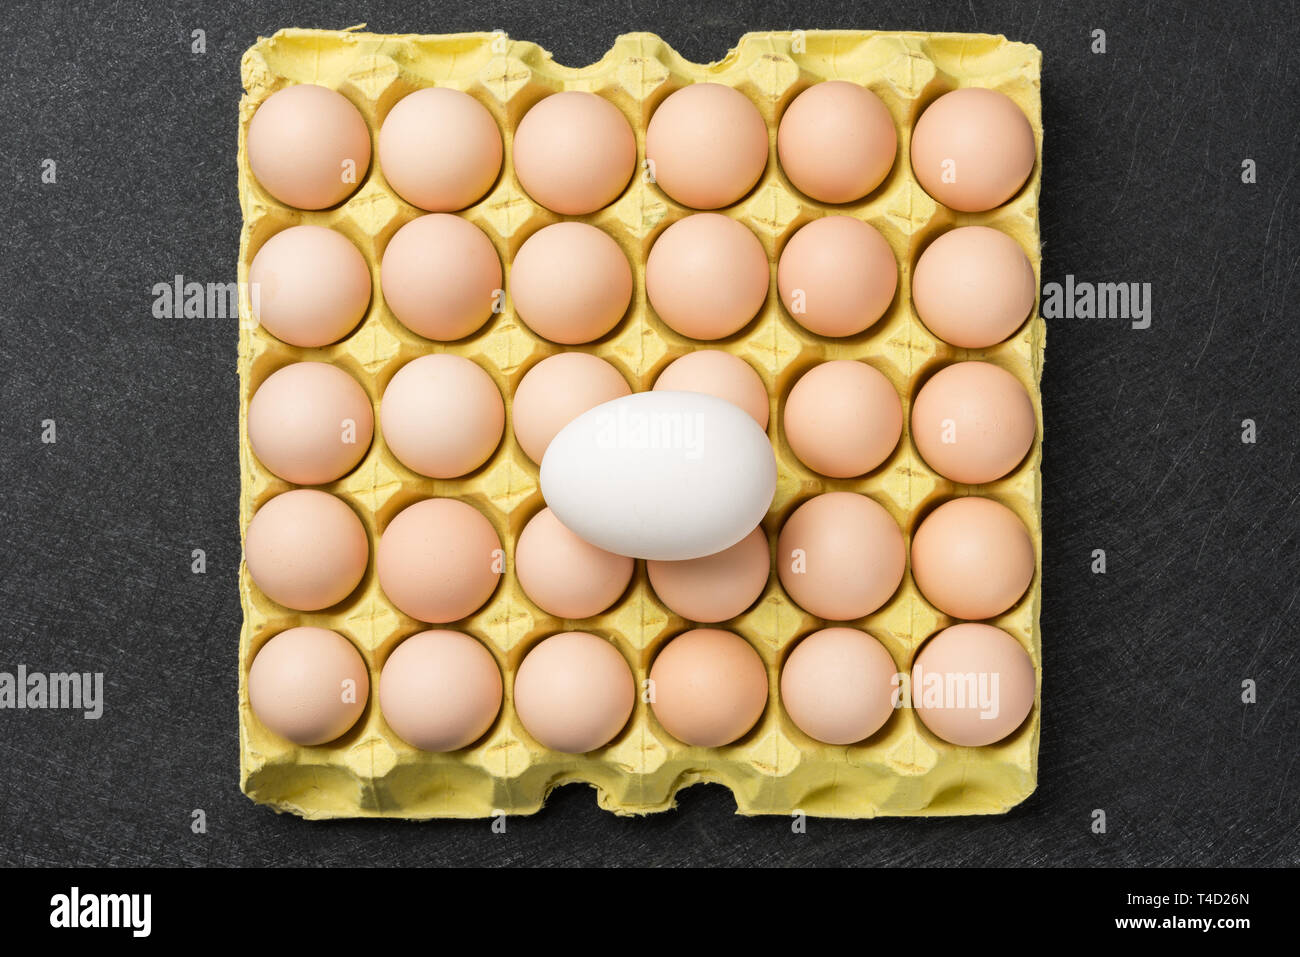 giant size goose egg on top of small chicken eggs concept of size comparison Stock Photo